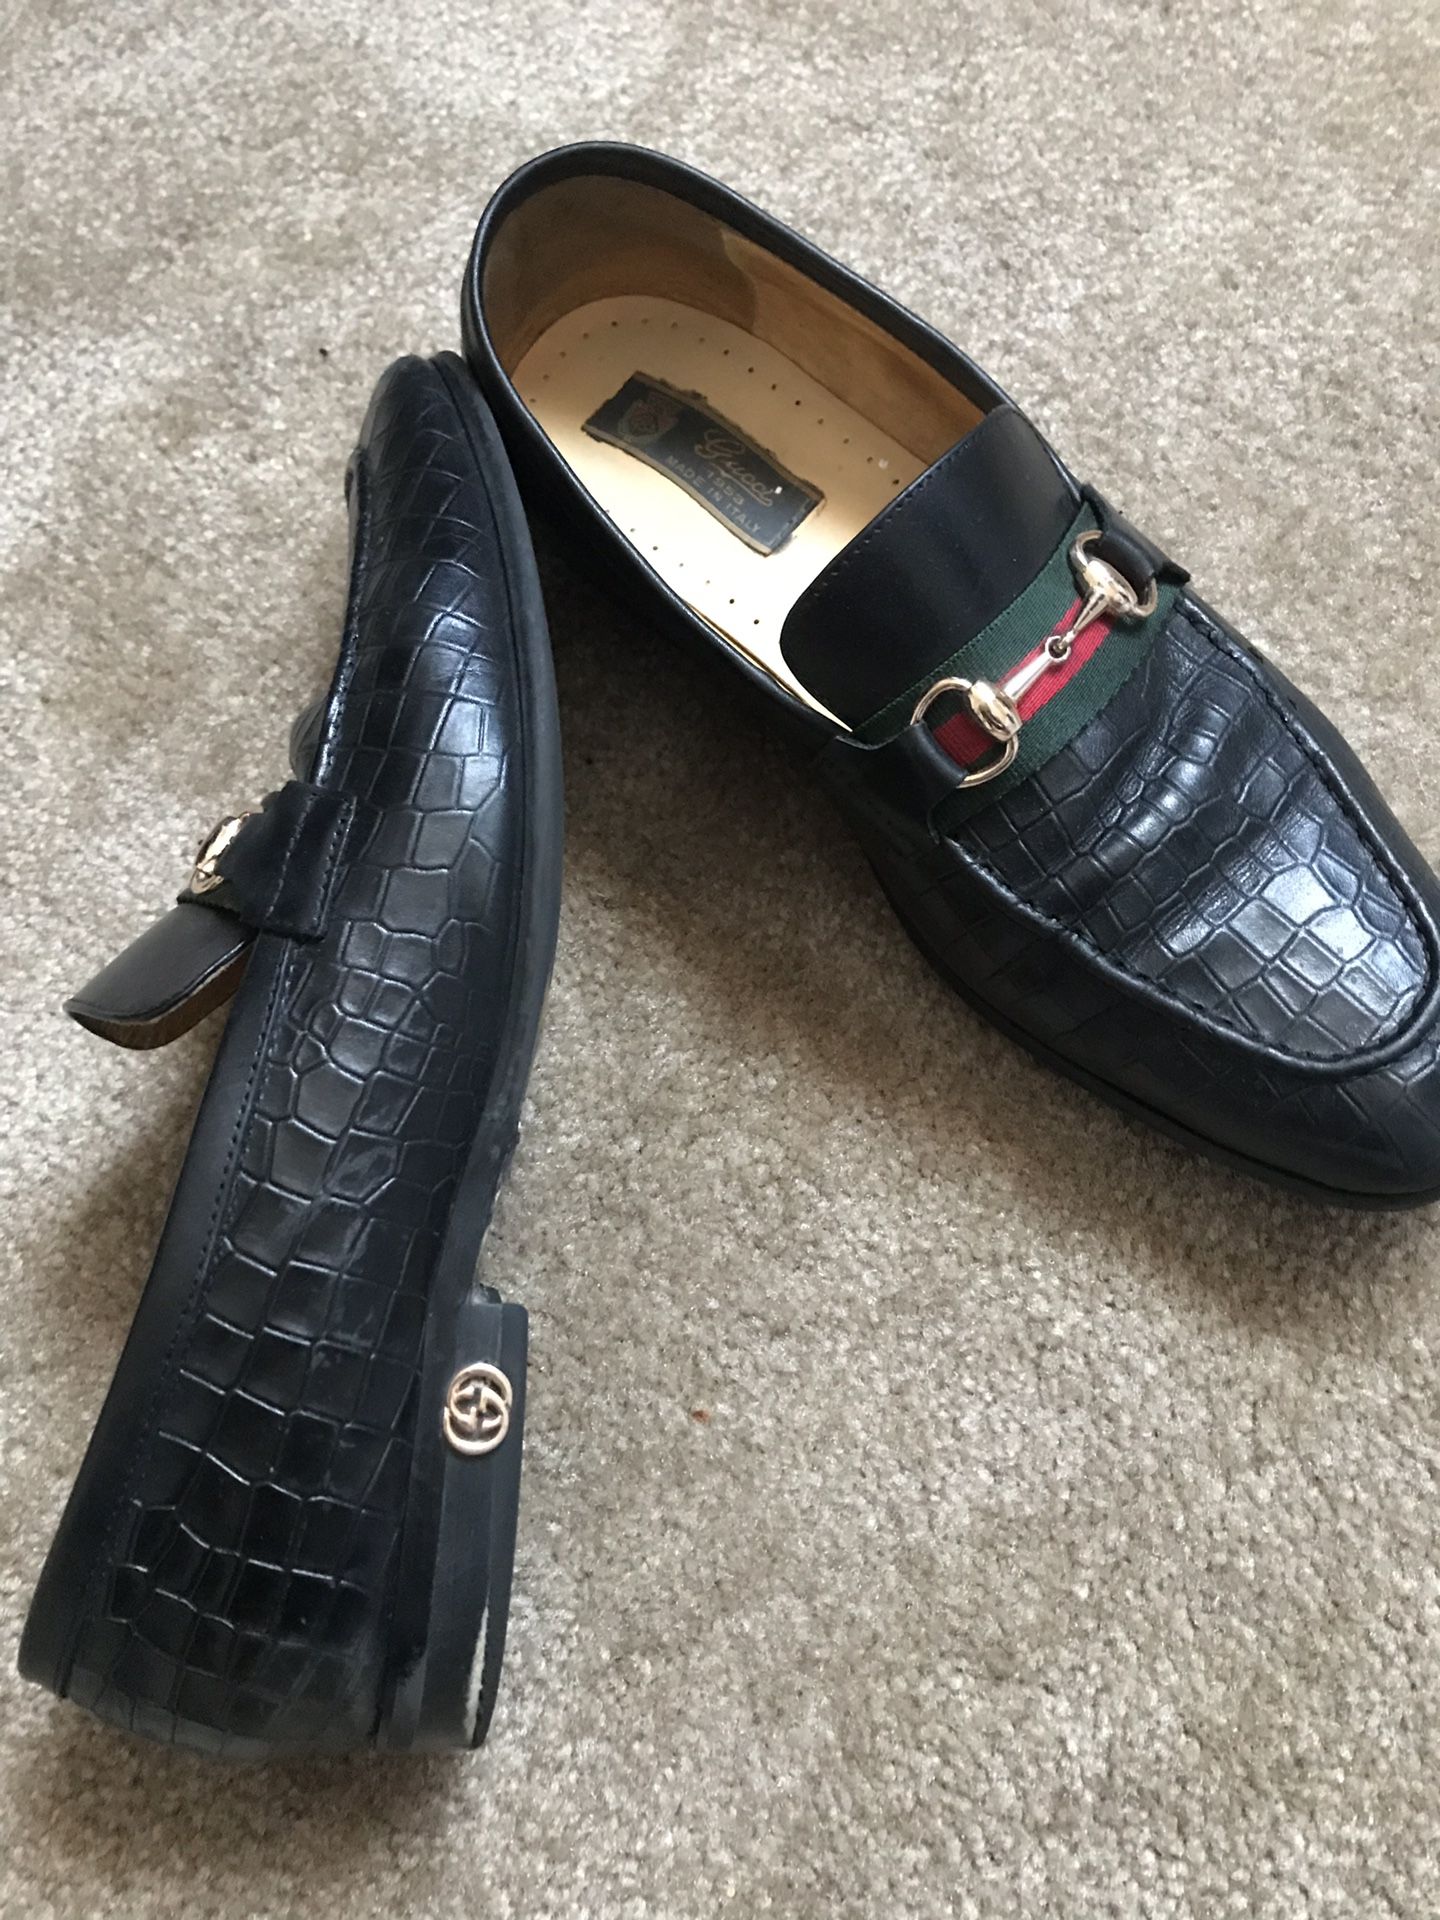 Gucci shoes size 11 for men 44 , good condition